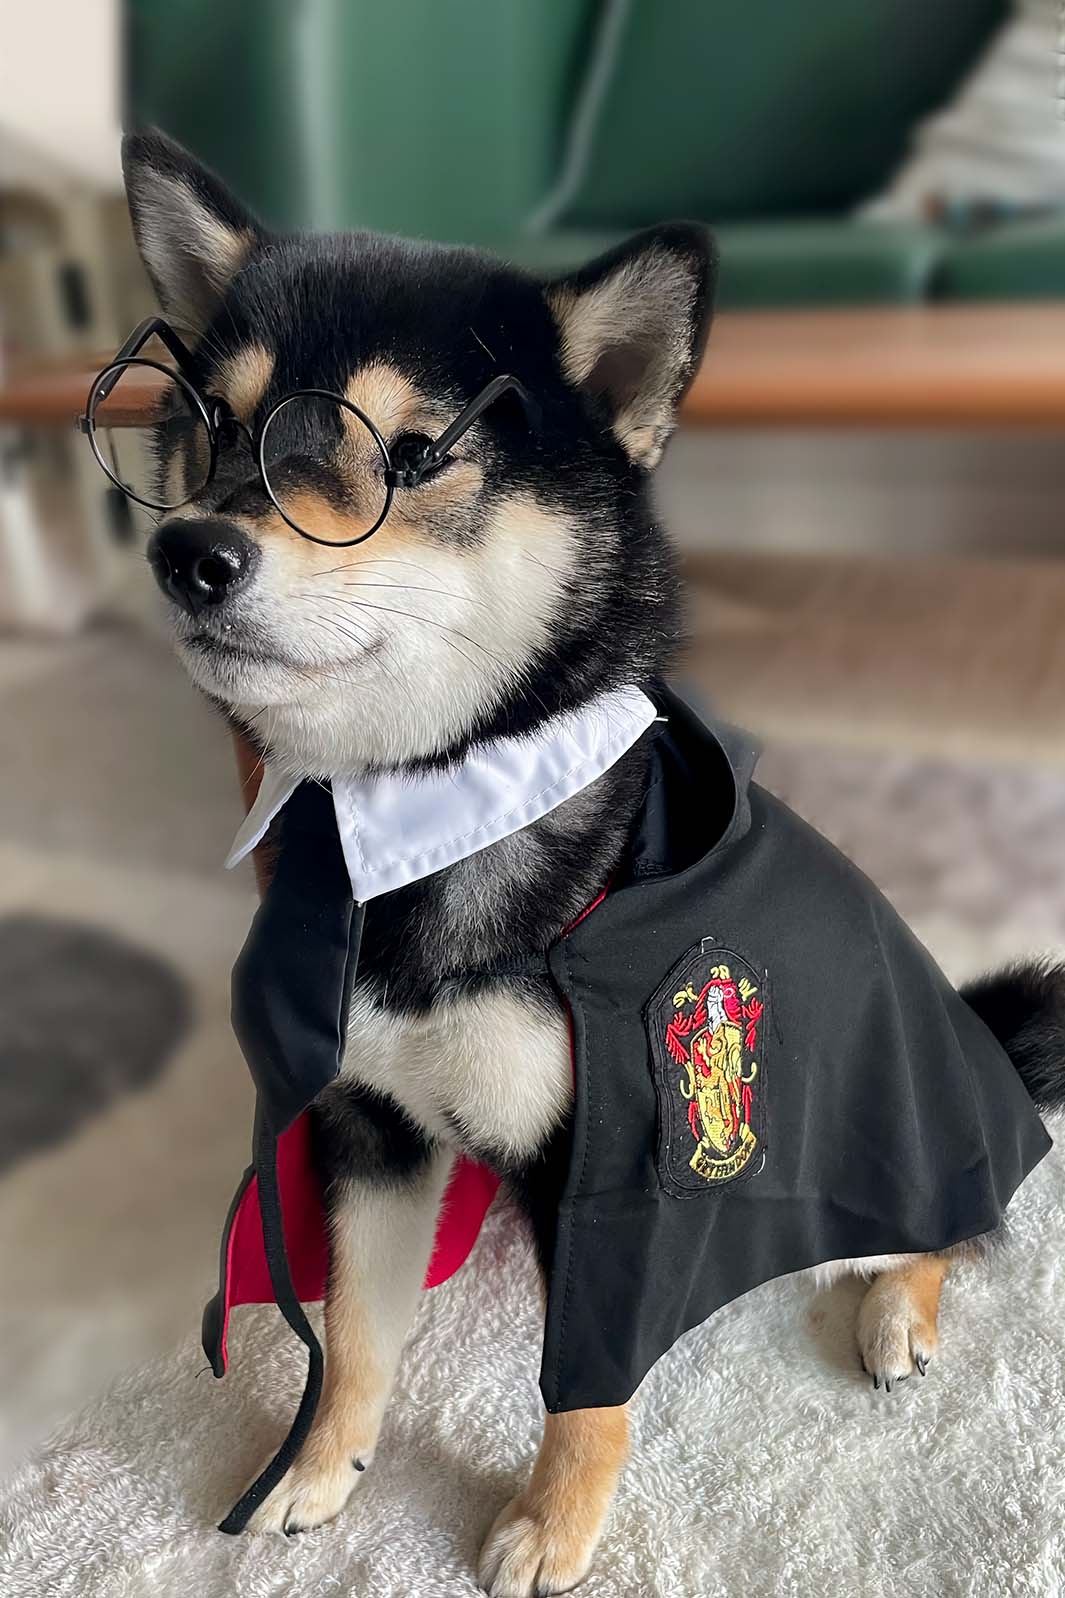 Shiba Inu puppy wearing Harry Pupper Gryffindog Dog Costume - Magical Dog Cloak Ensemble complete with dog reading glasses plus a white collar & black dog tie from online dog costume shop they made me wear it.